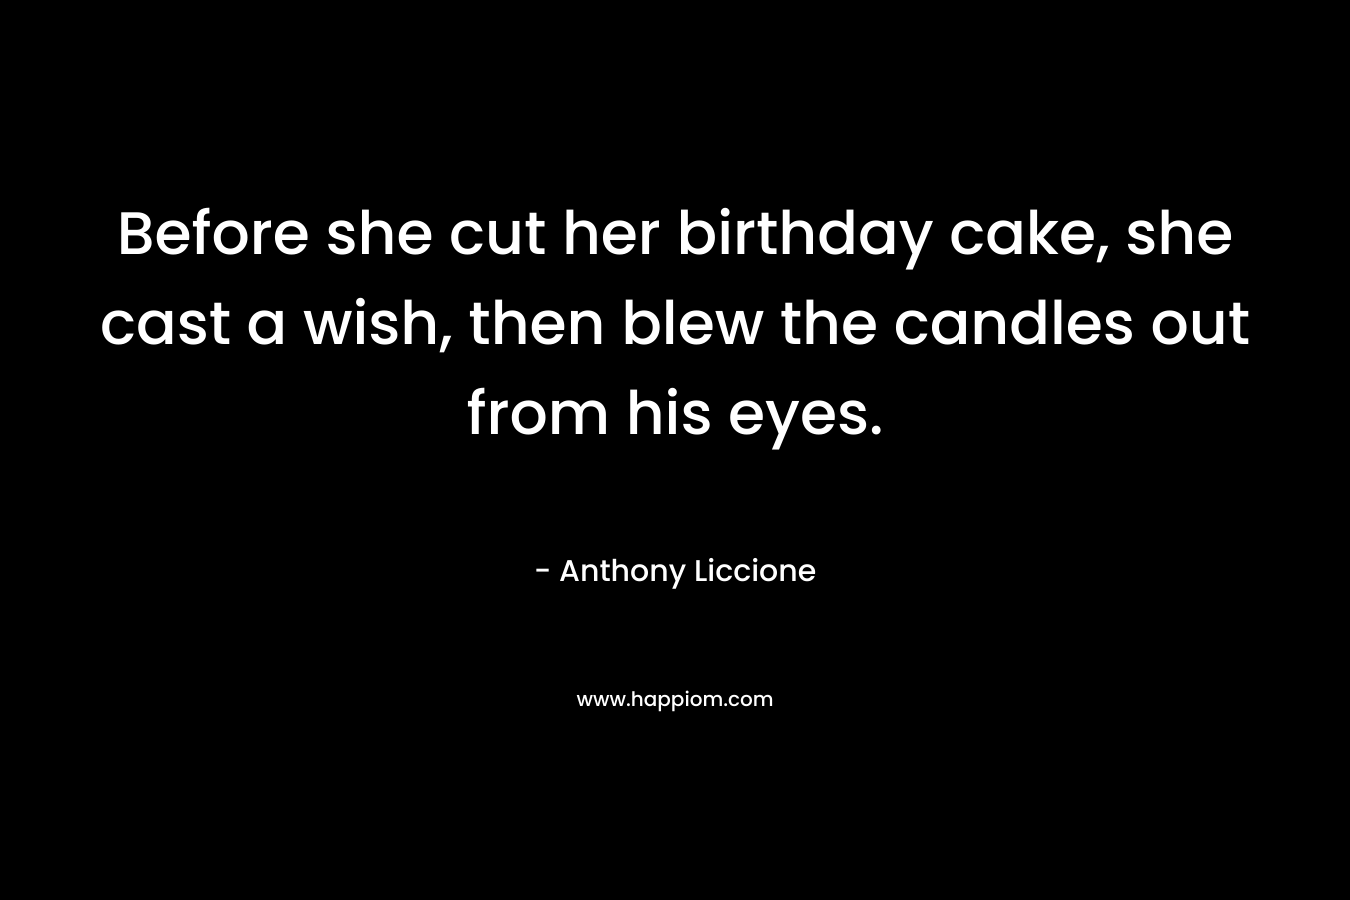 Before she cut her birthday cake, she cast a wish, then blew the candles out from his eyes.